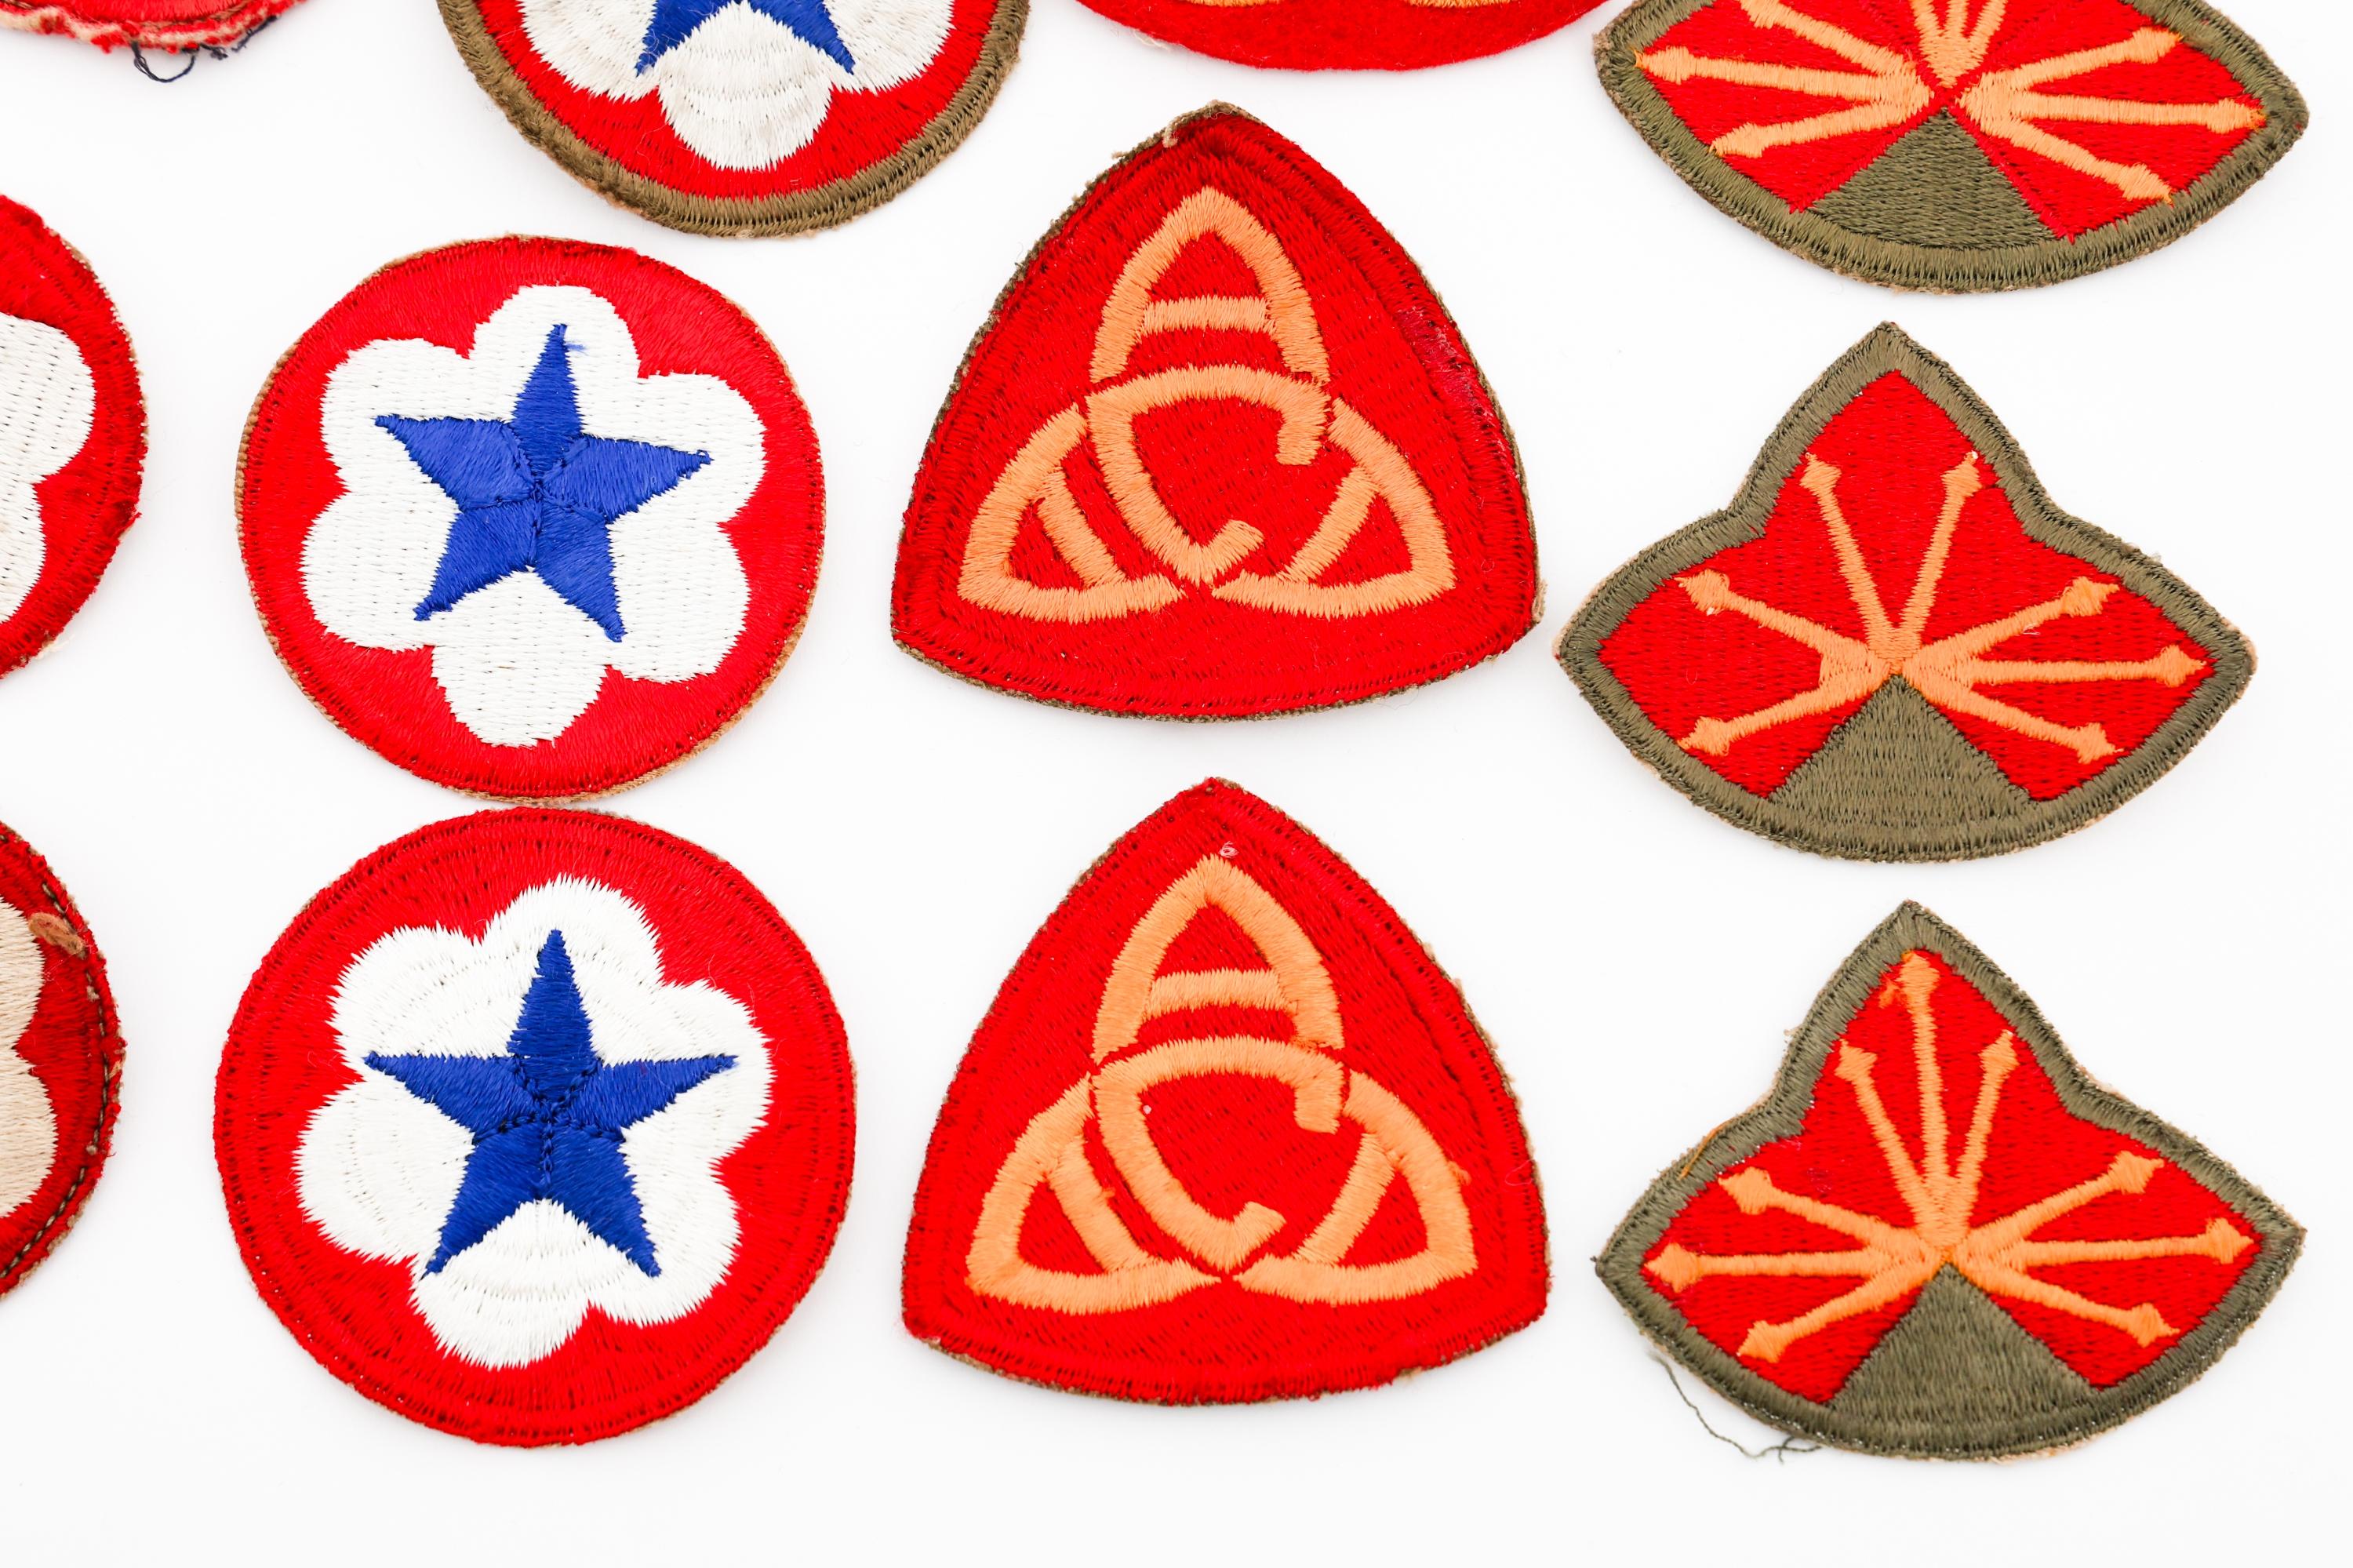 WWII - COLD WAR US ARMY COMMAND & SCHOOL PATCHES